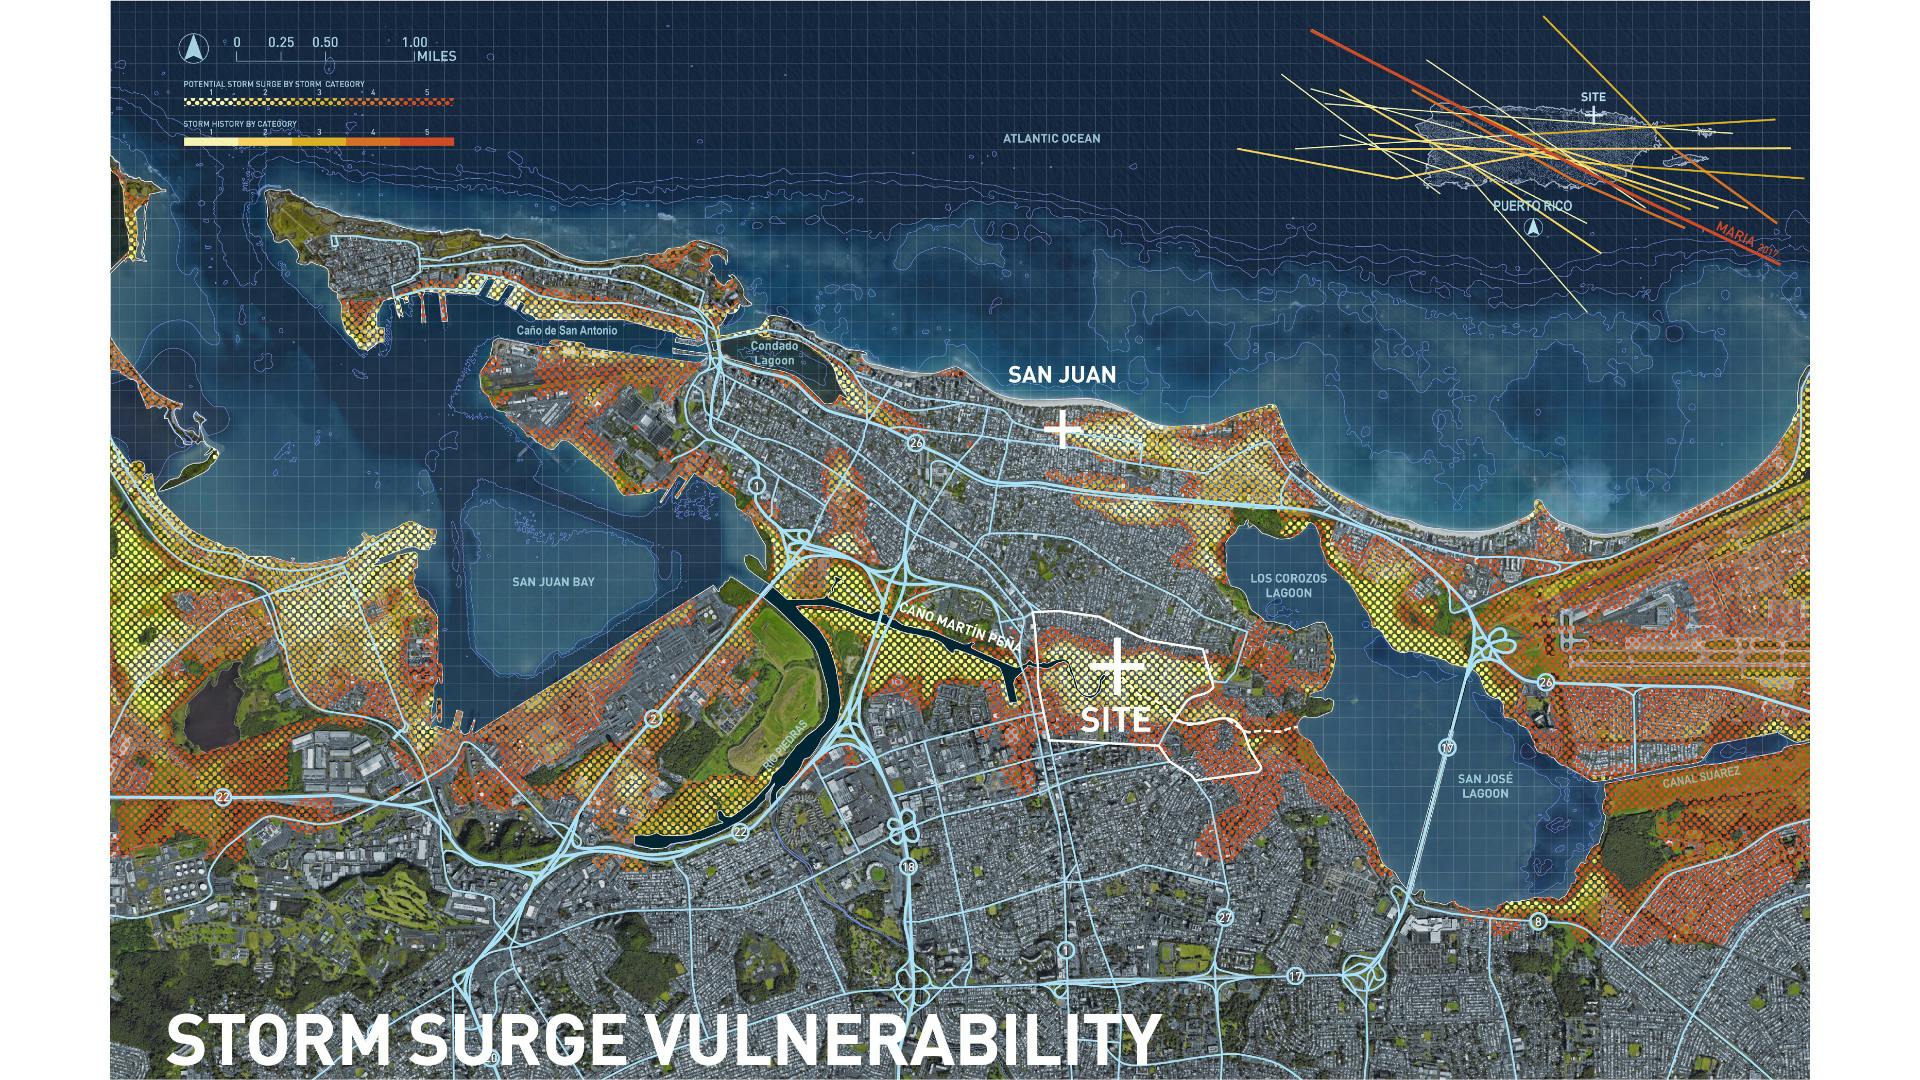 Plan illustrating site boundary, revealing storm surge vulnerability, with storm surge category ranging from 1-5.